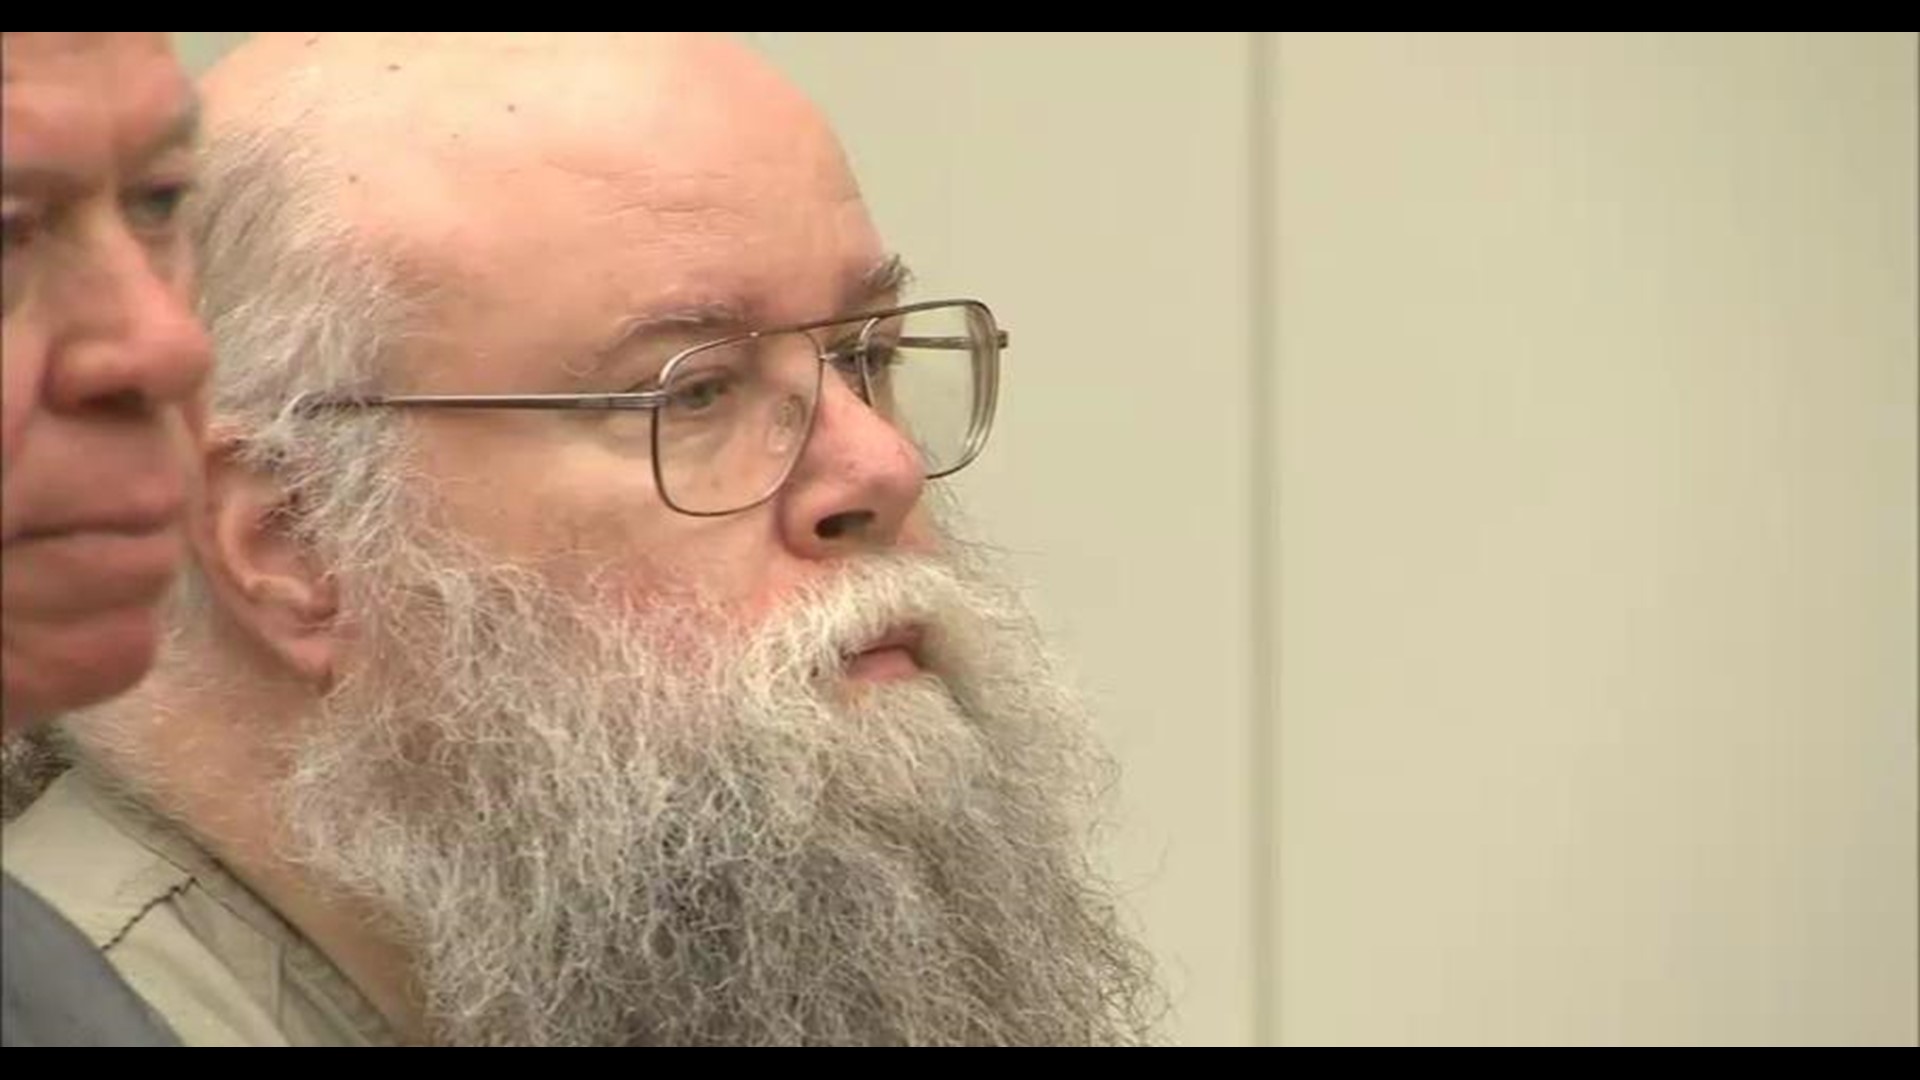 Greek Orthodox Priest Pleads Guilty To Attempted Rape, Sentenced To 6 Years